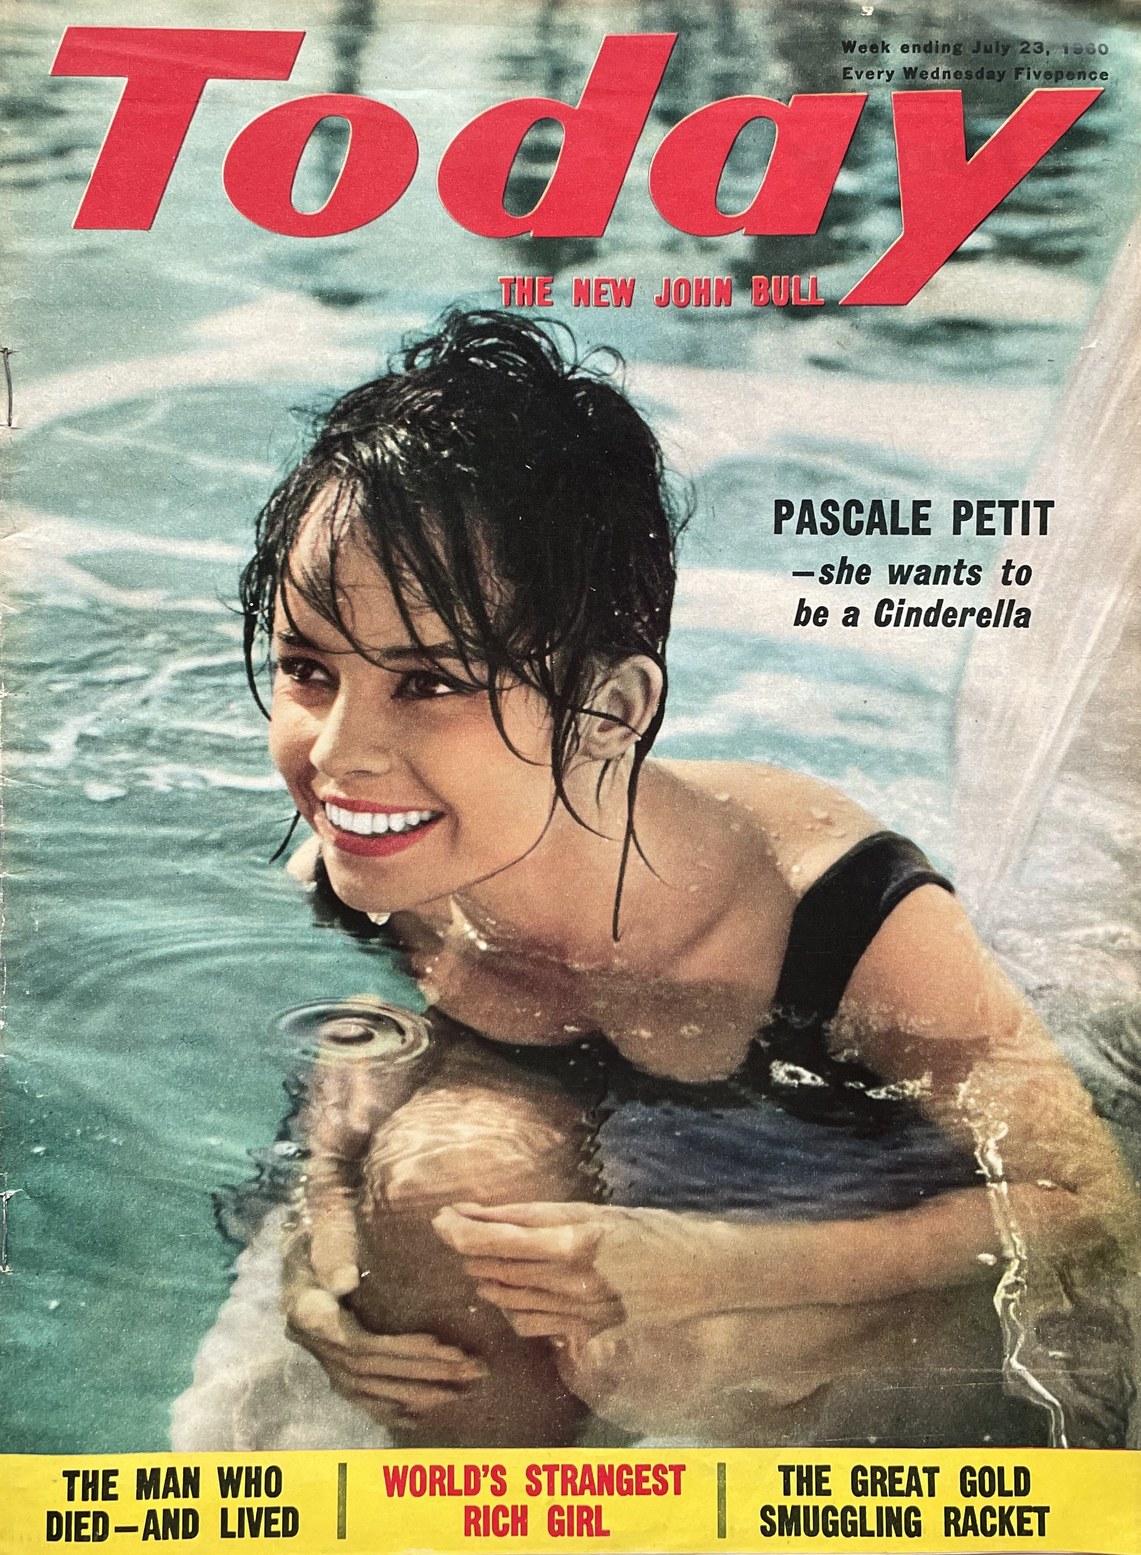 pascale petite Cover Today 23 July 1960